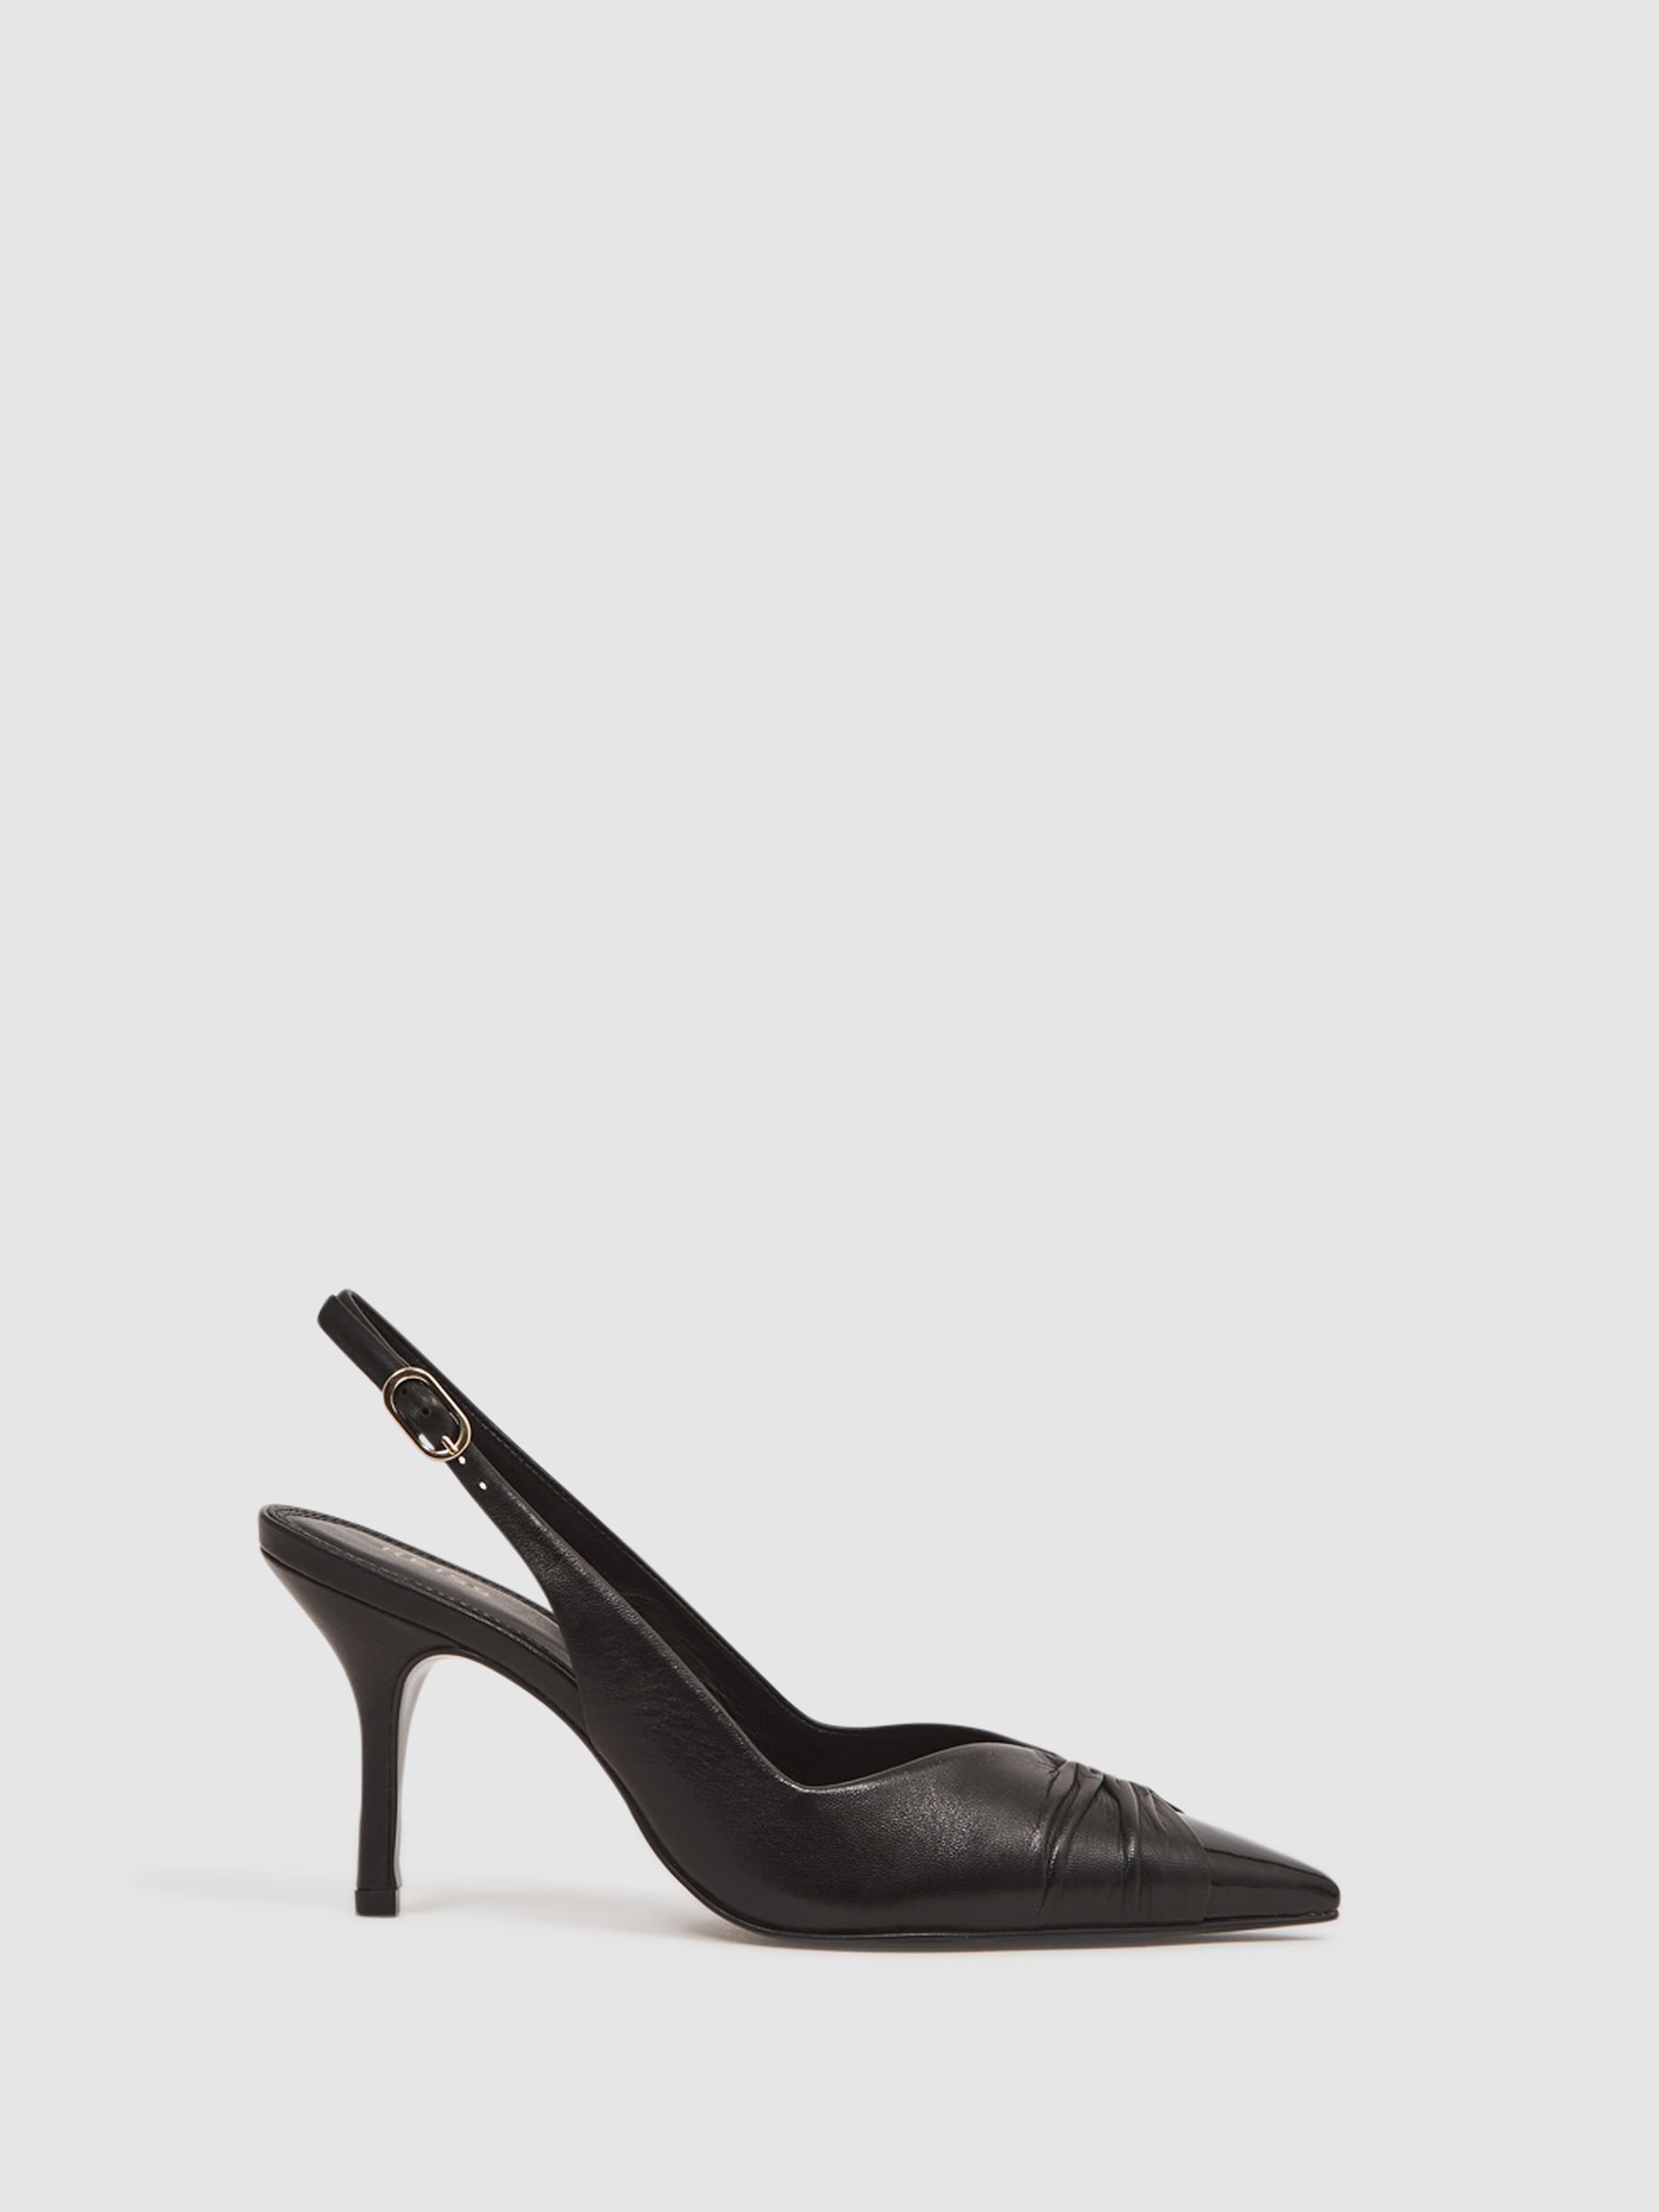 Reiss Delilah Mid Heel Leather Sling Back Court Shoes - REISS